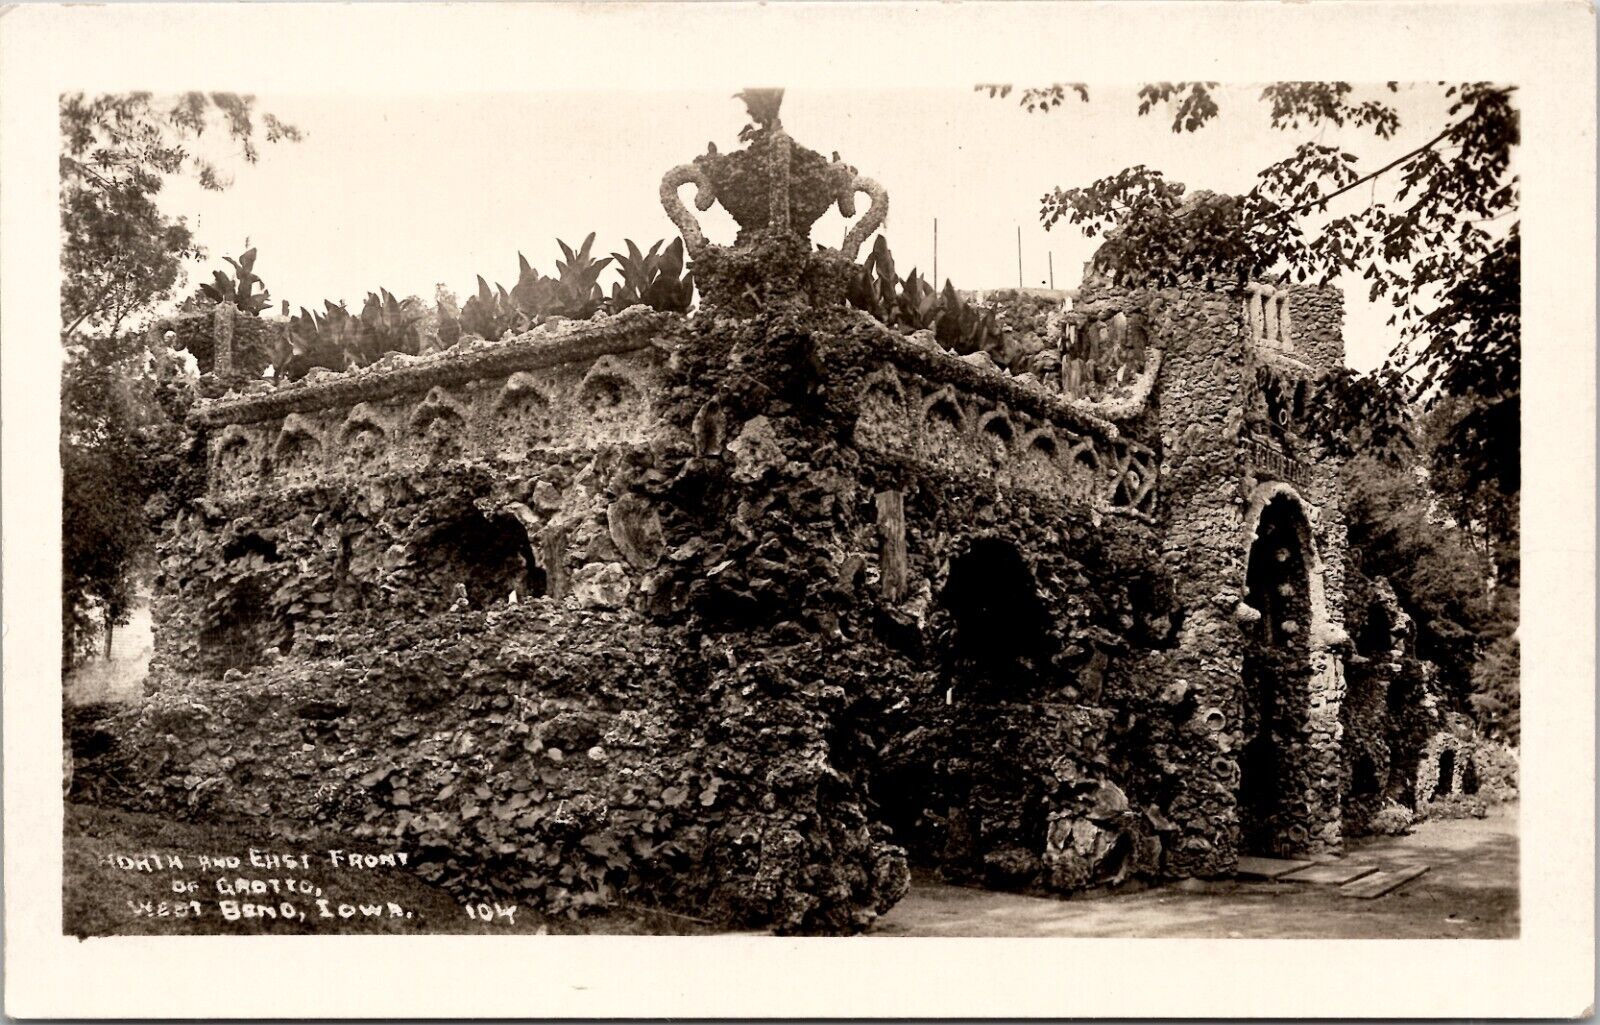 North and East Front of Grotto, West Bend, Iowa Vintage Postcard Wps1